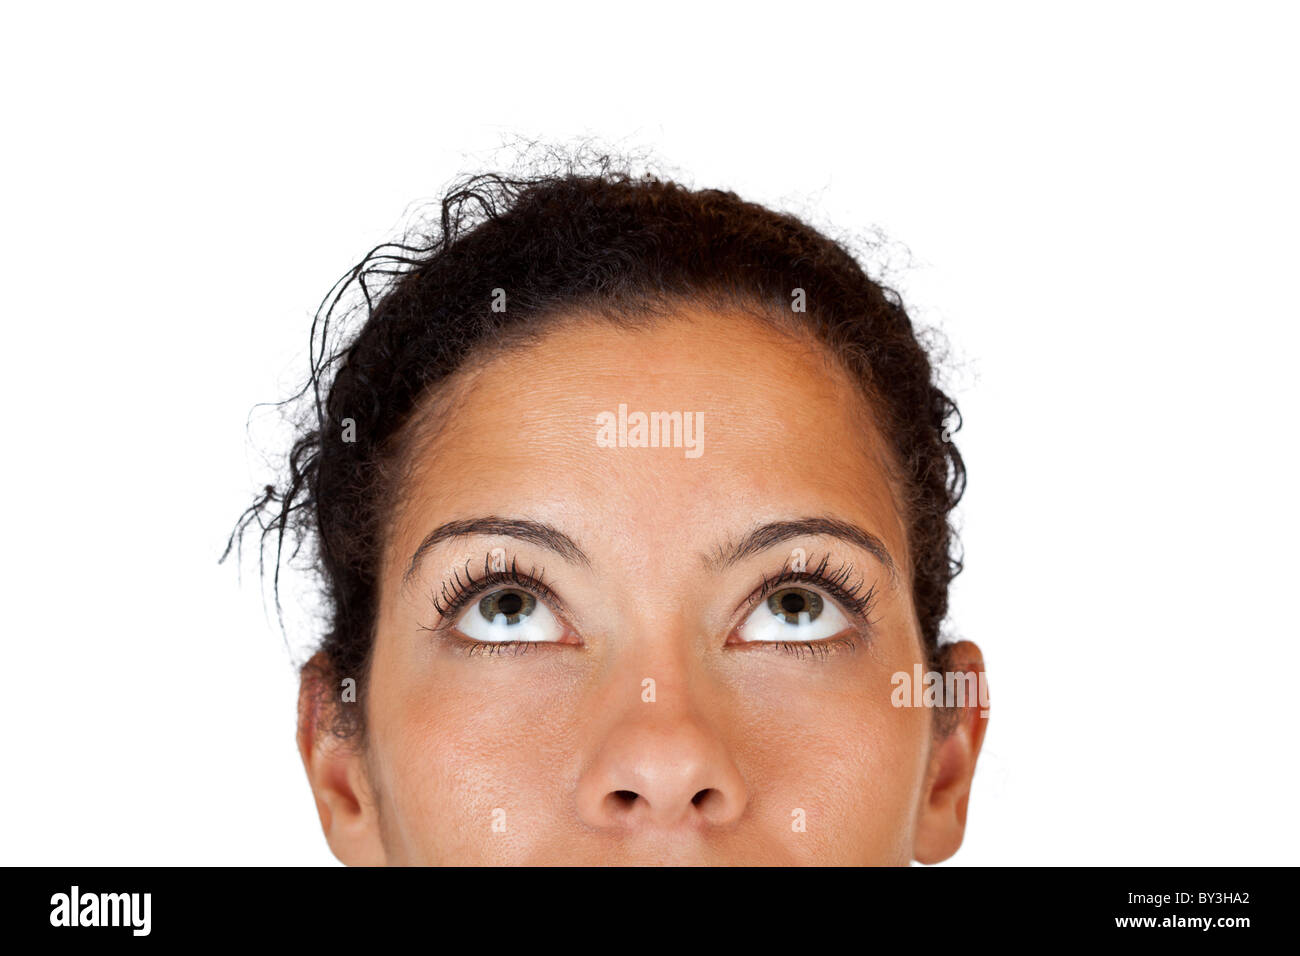 Close-up makro of woman looking up. Isolated on white background. Stock Photo